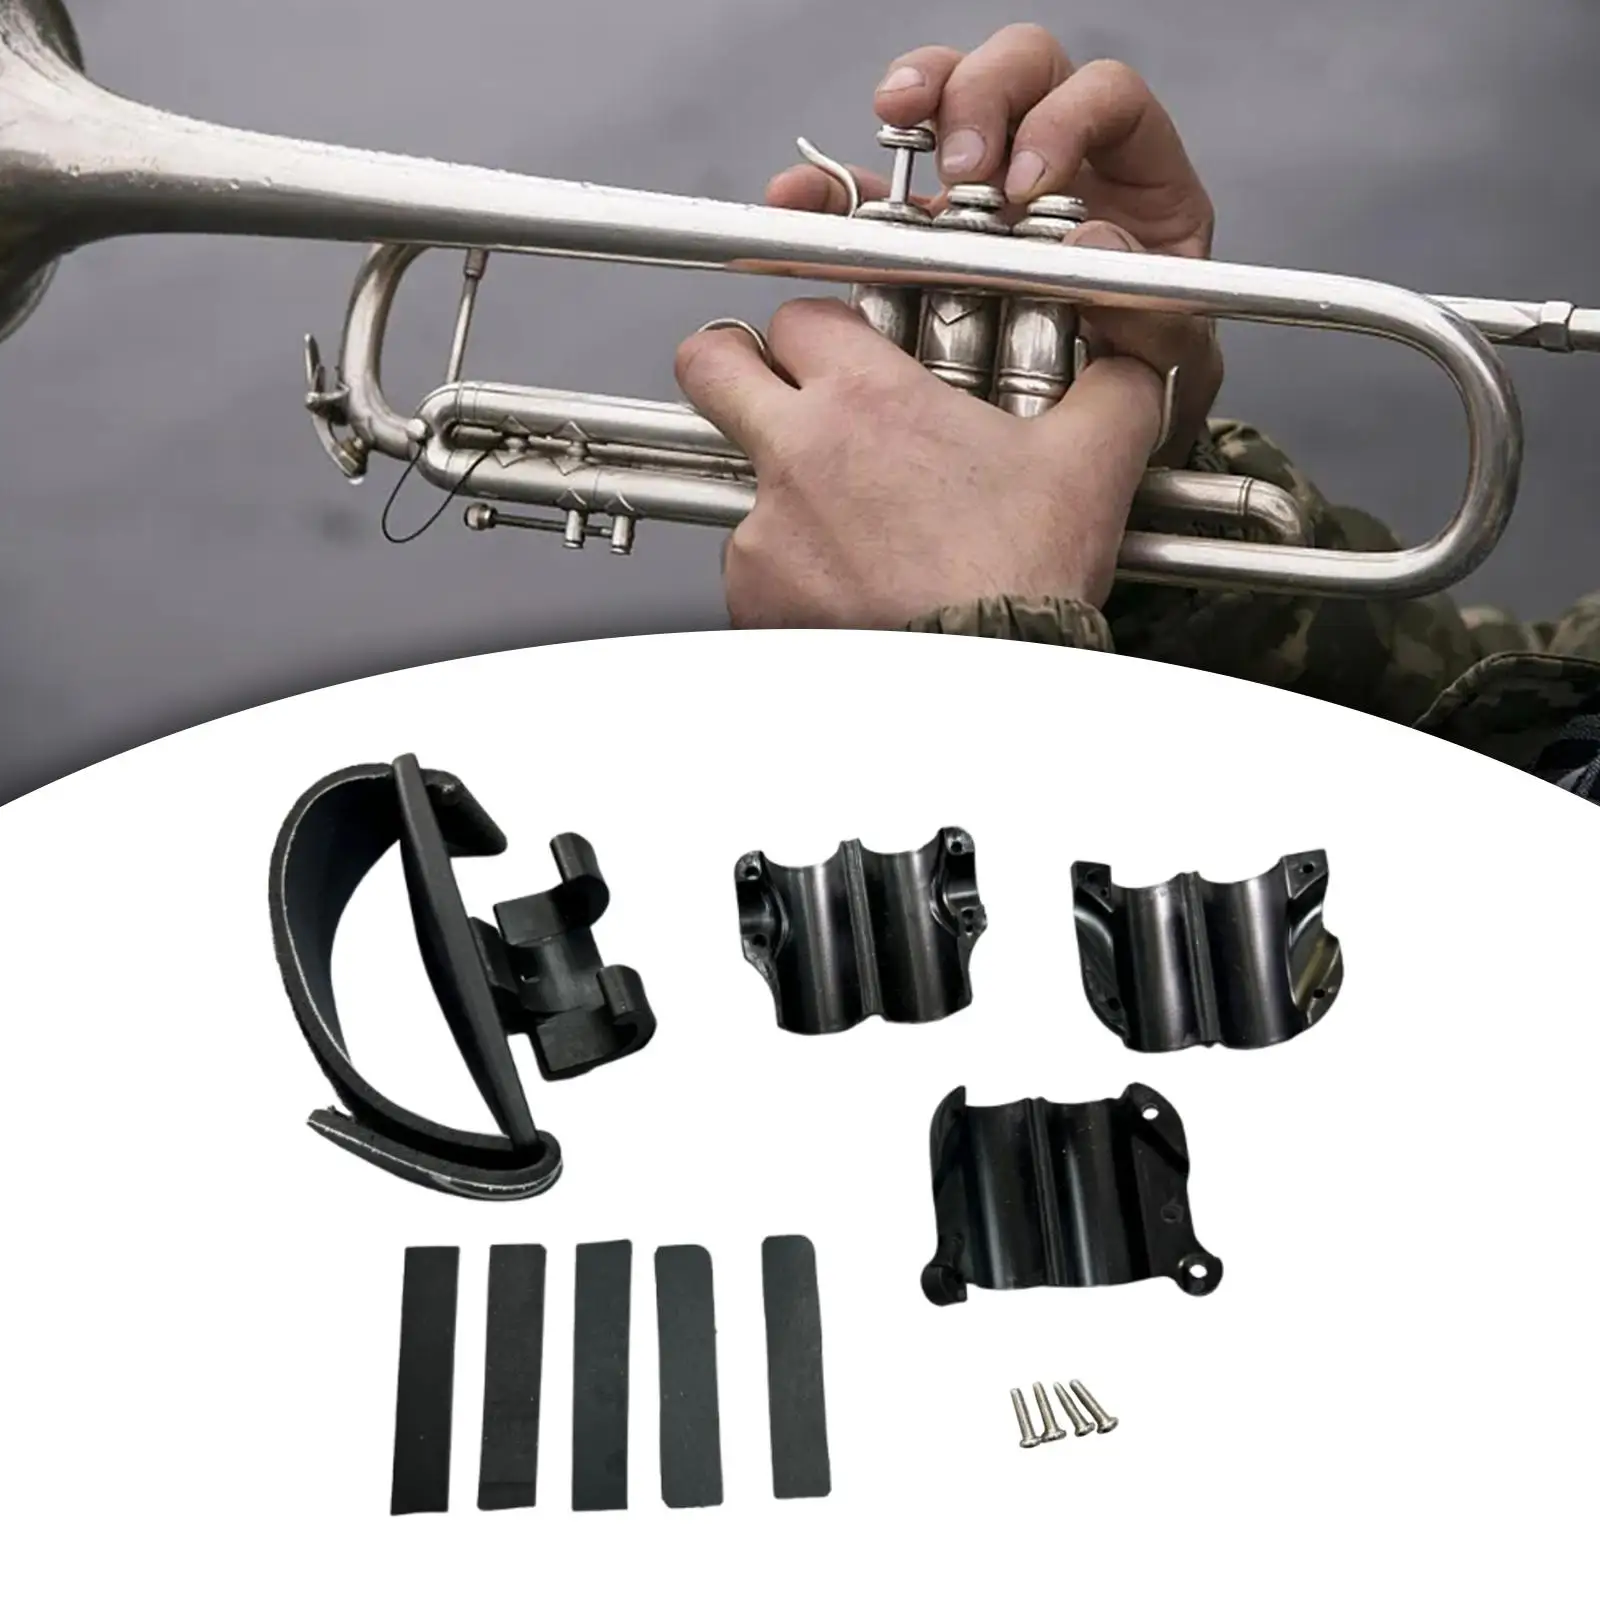 Trombone Grip Protection Adjustable Musician Gifts Cleaning Care Parts